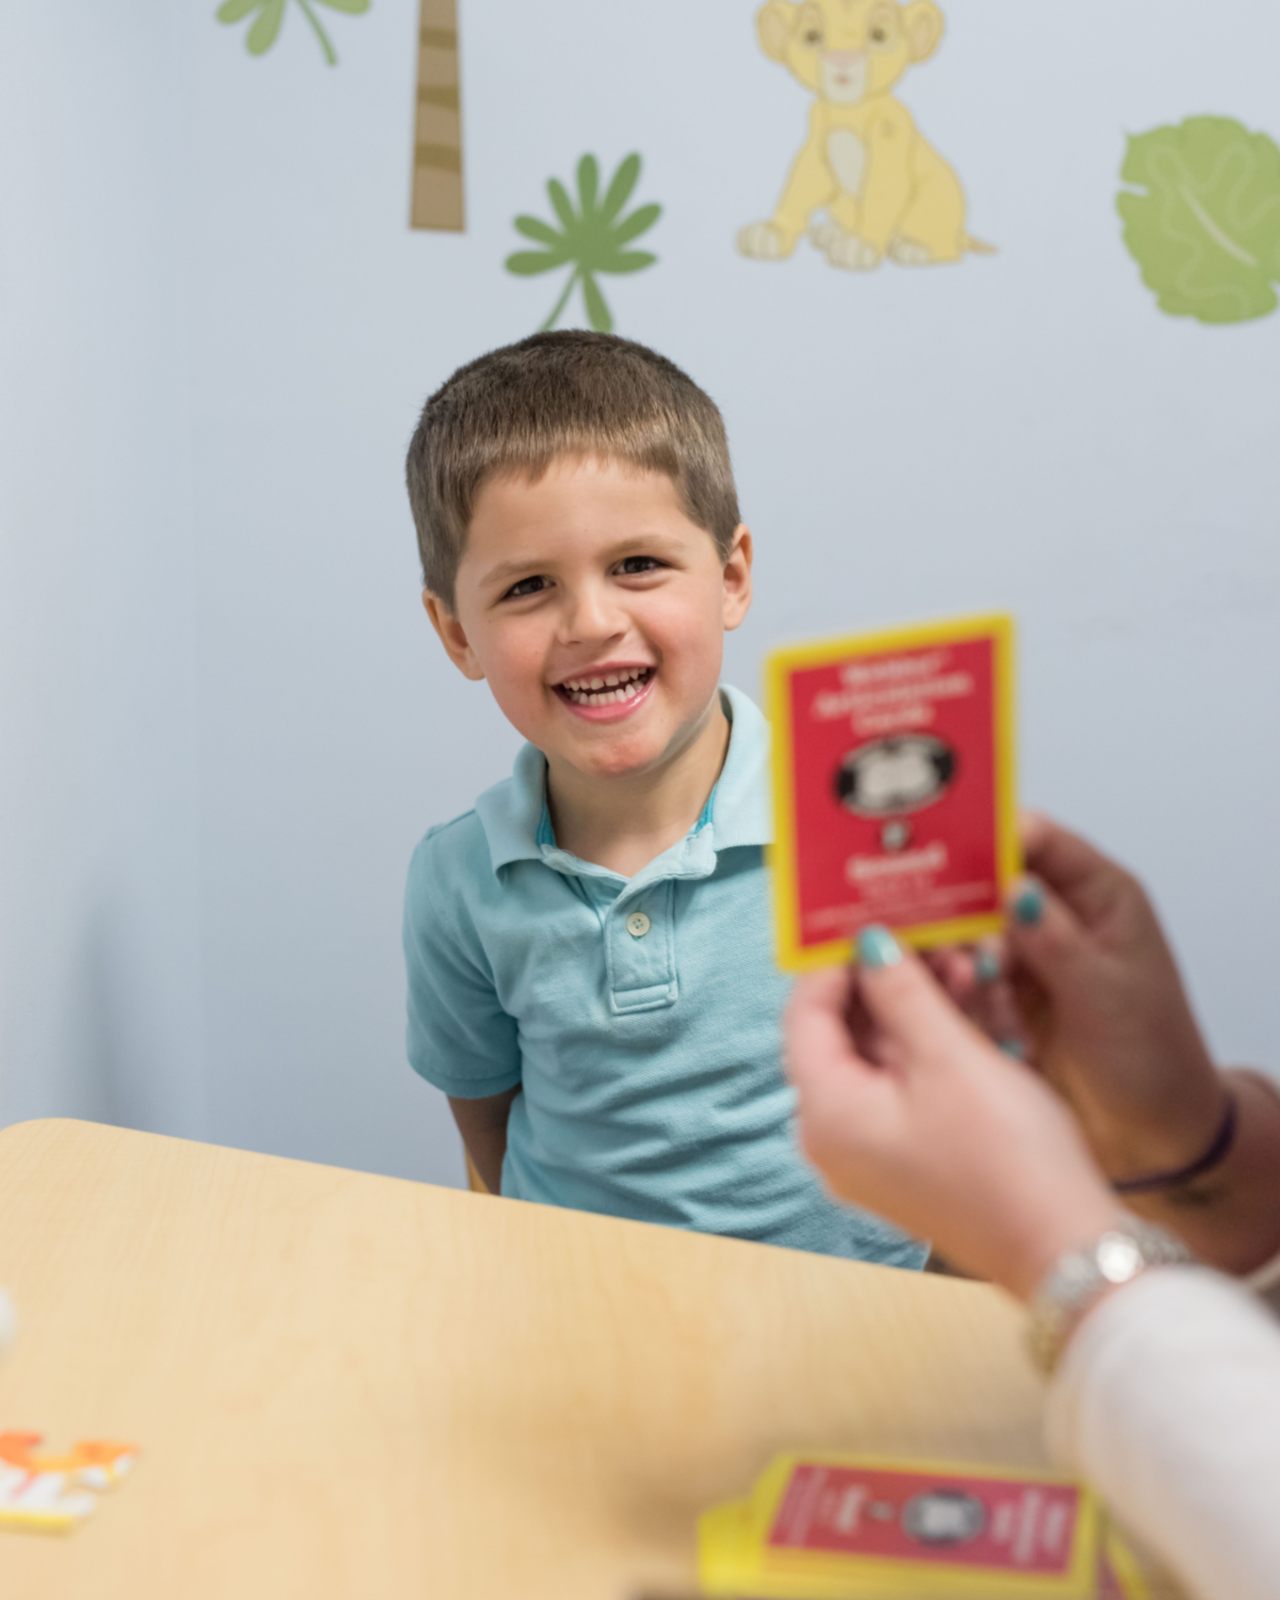 Speech Therapy for Kids in Hingham, Pembroke & Norwood, MA